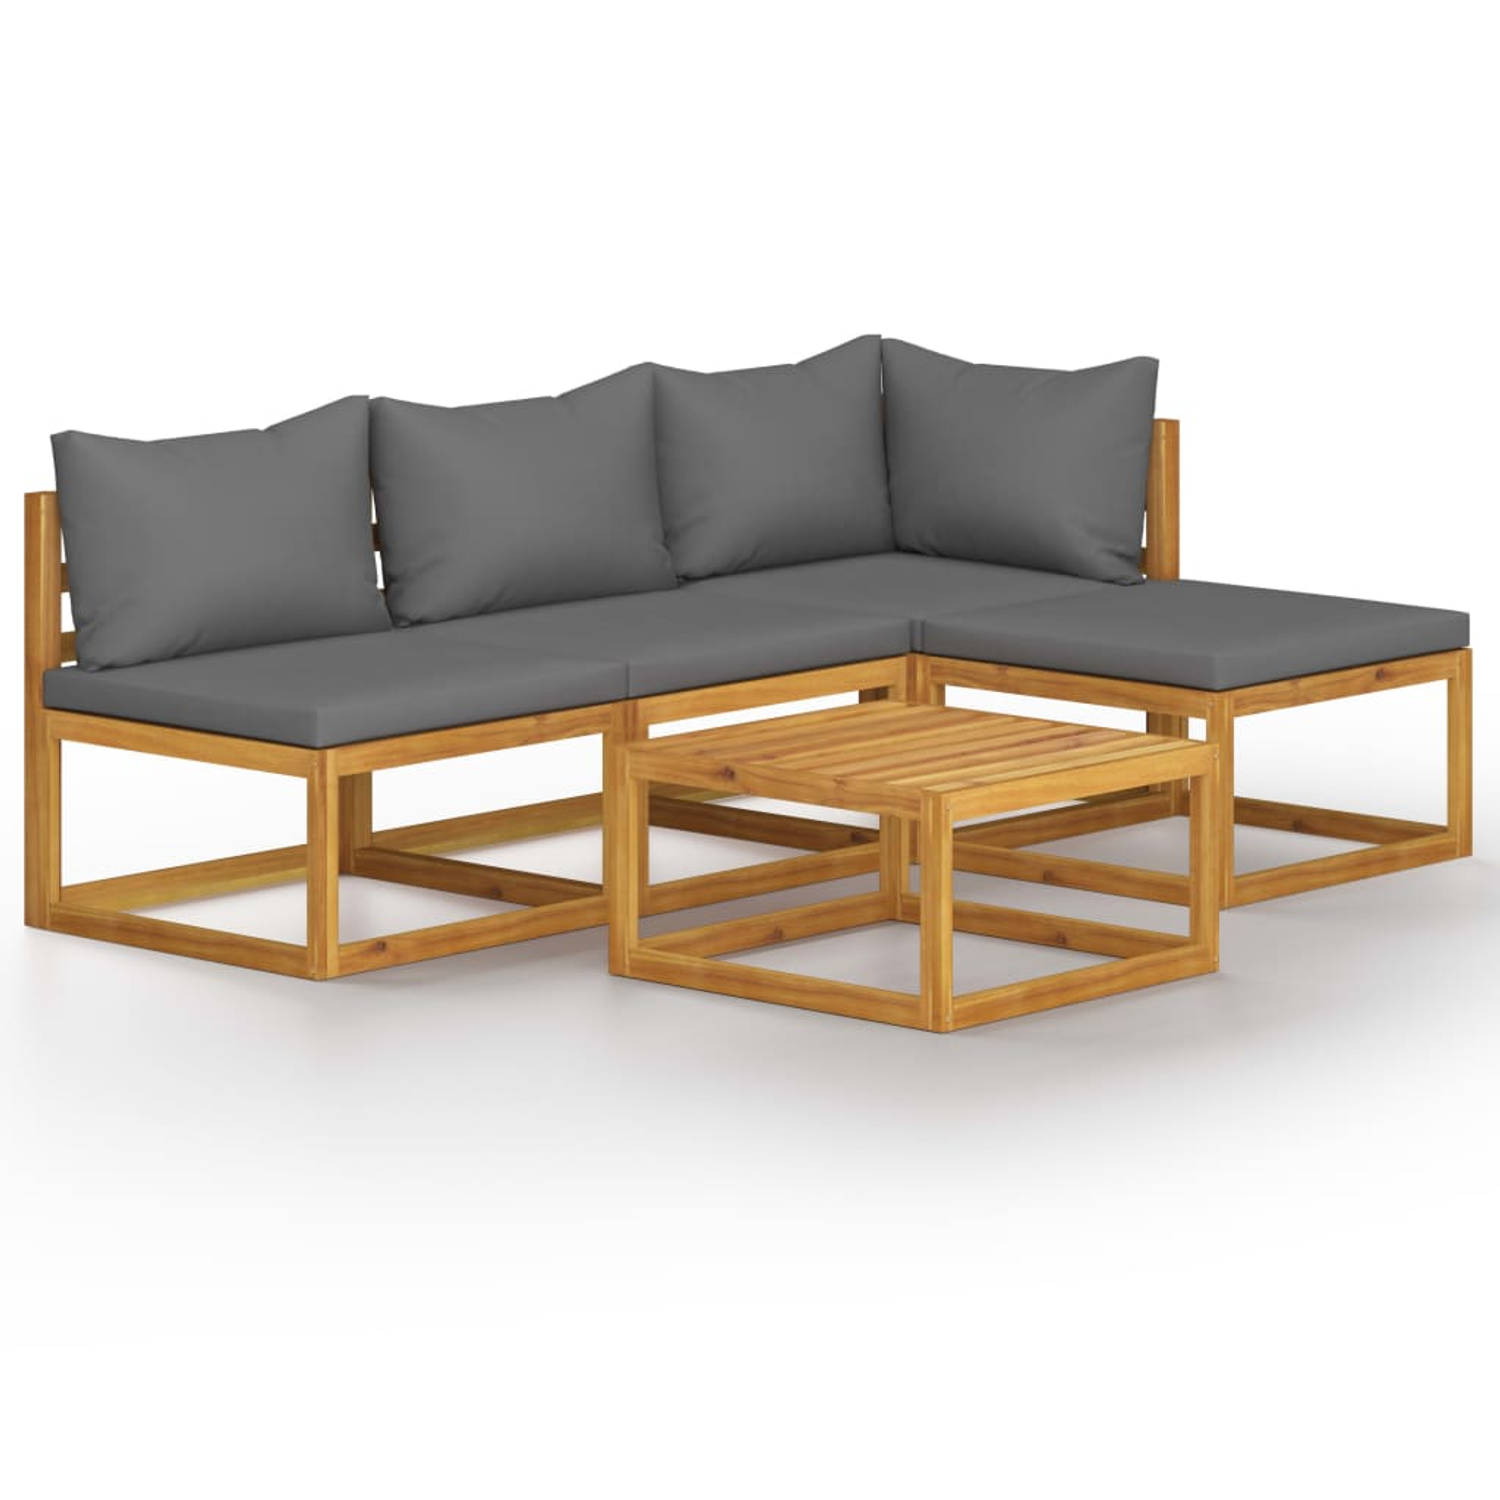 The Living Store 5-delige Loungeset met kussens massief acaciahout - Tuinset